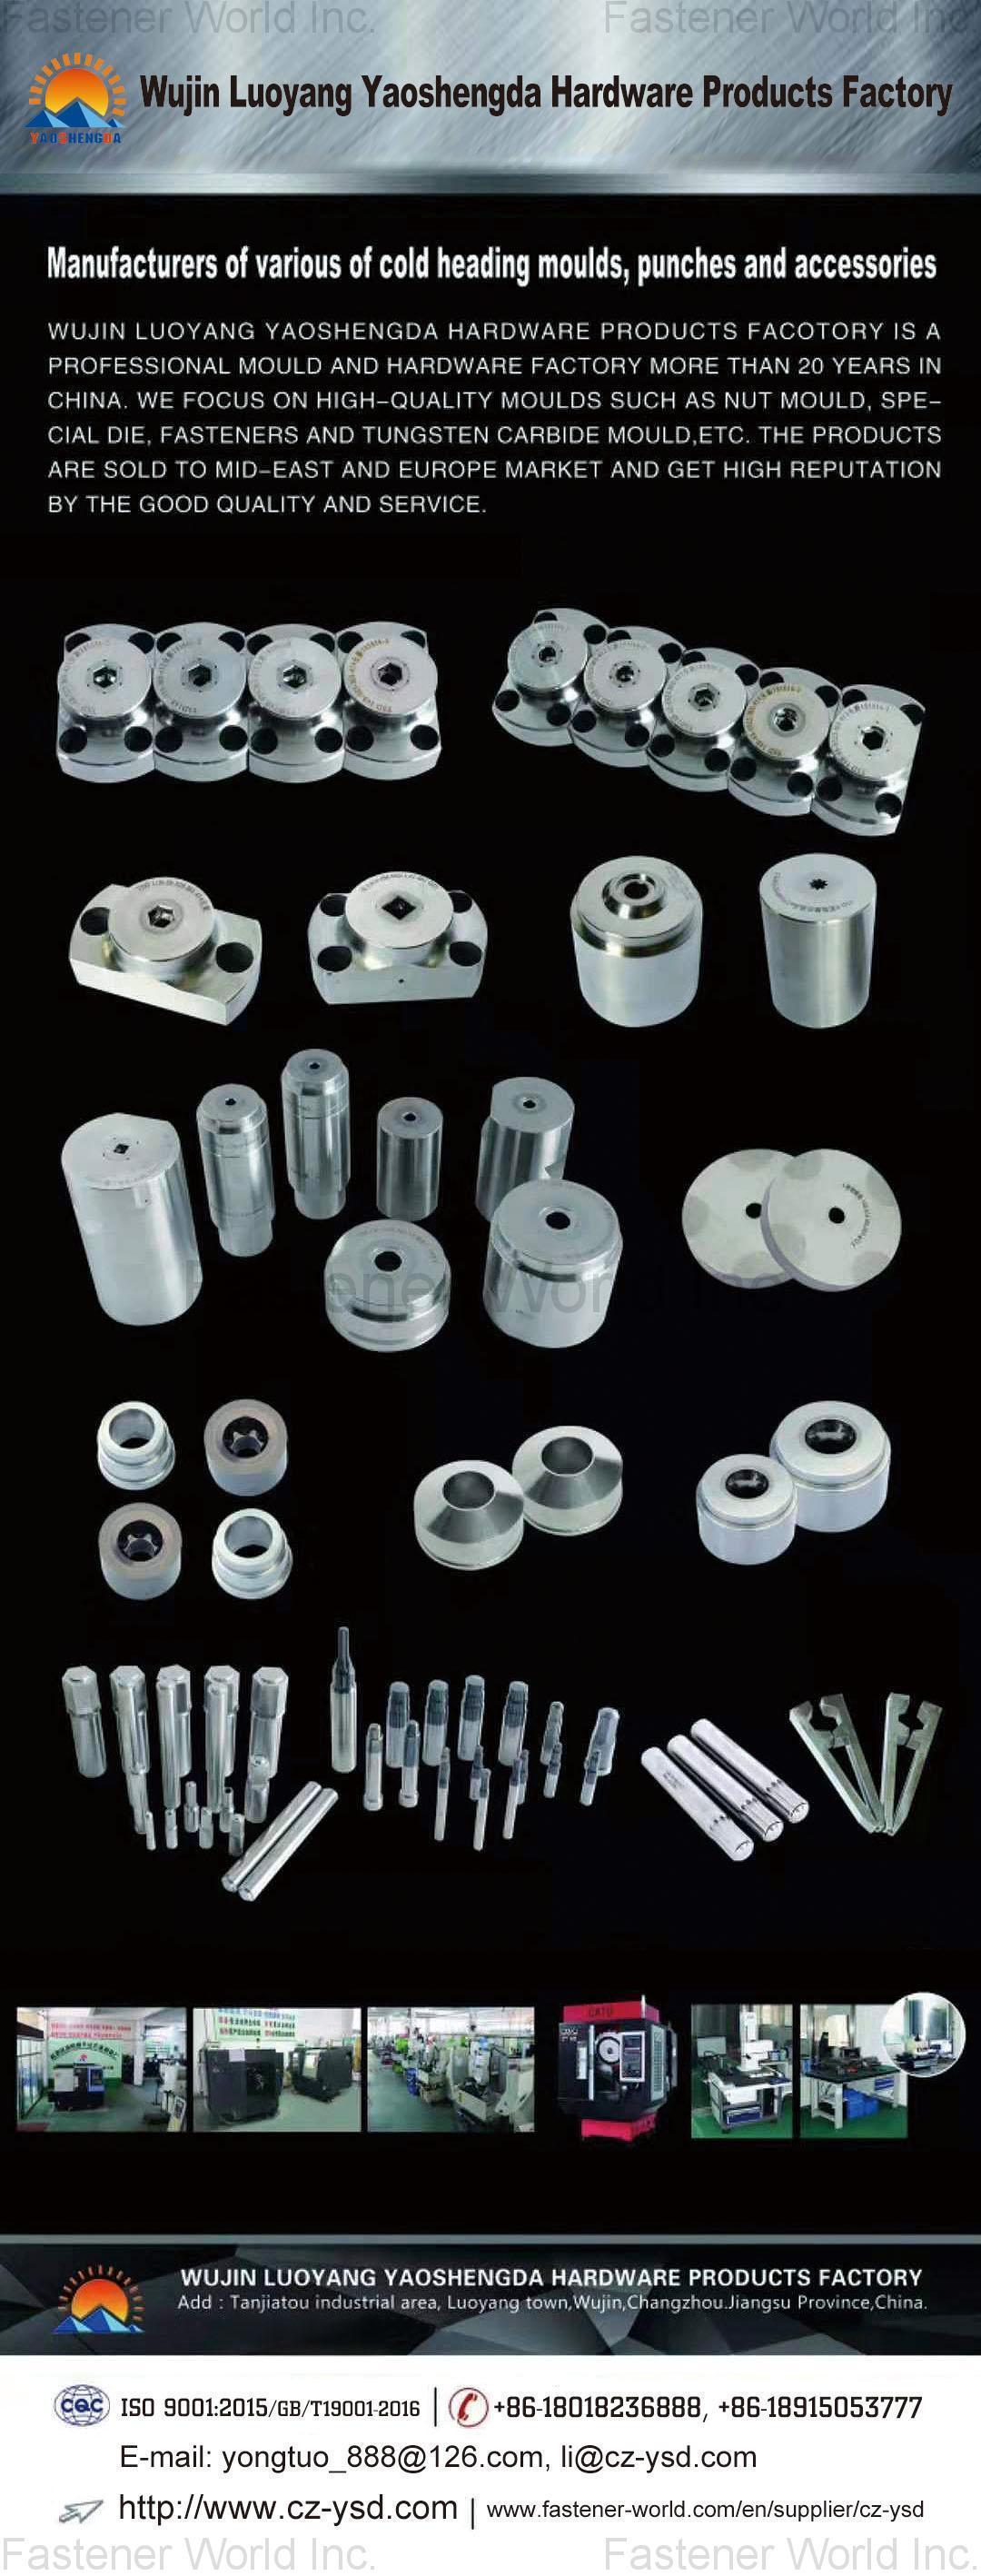 WUJIN LUOYANG YAOSHENGDA HARDWARE PRODUCTS FACTORY , Cold Heading Moulds, Punches, Nut Moulds, Special Dies, Fasteners, Tungsten Carbide Mould